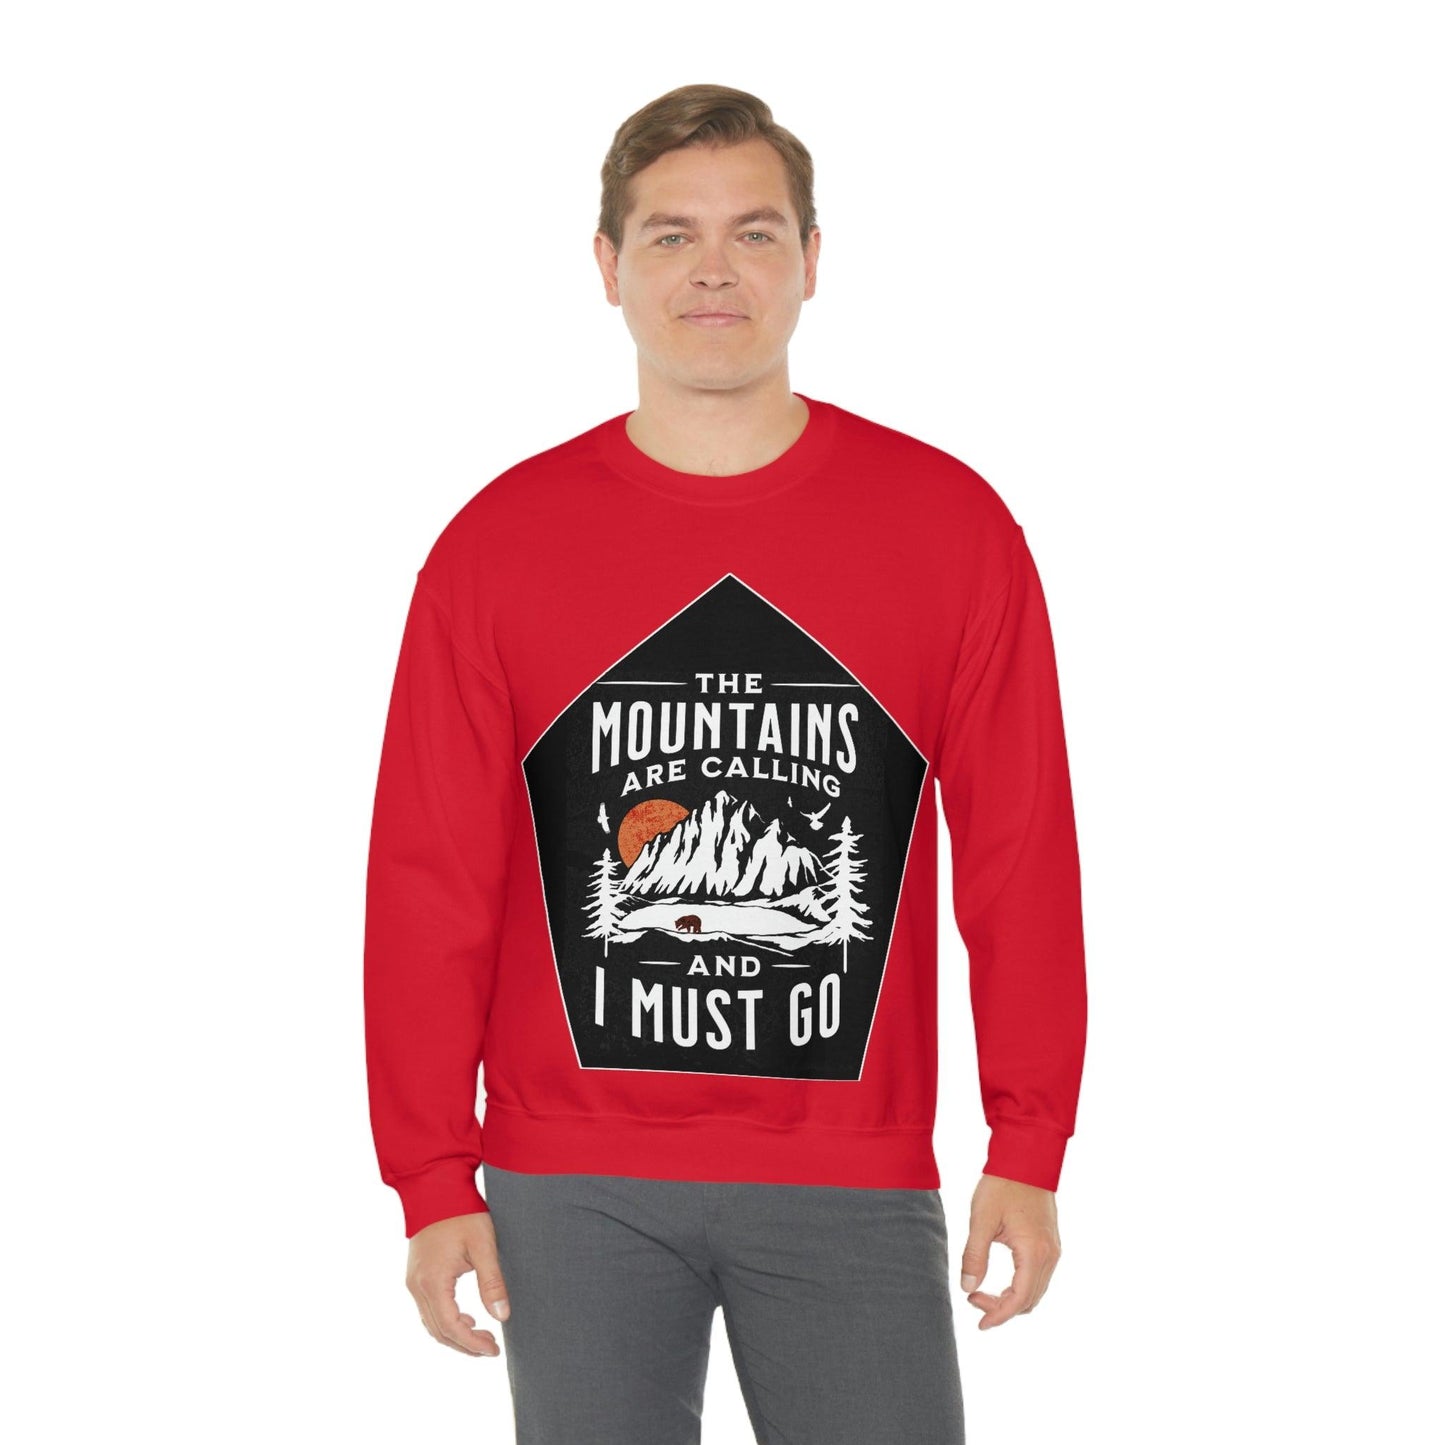 The Mountains are Calling and I Must Go, Crewneck Sweatshirt